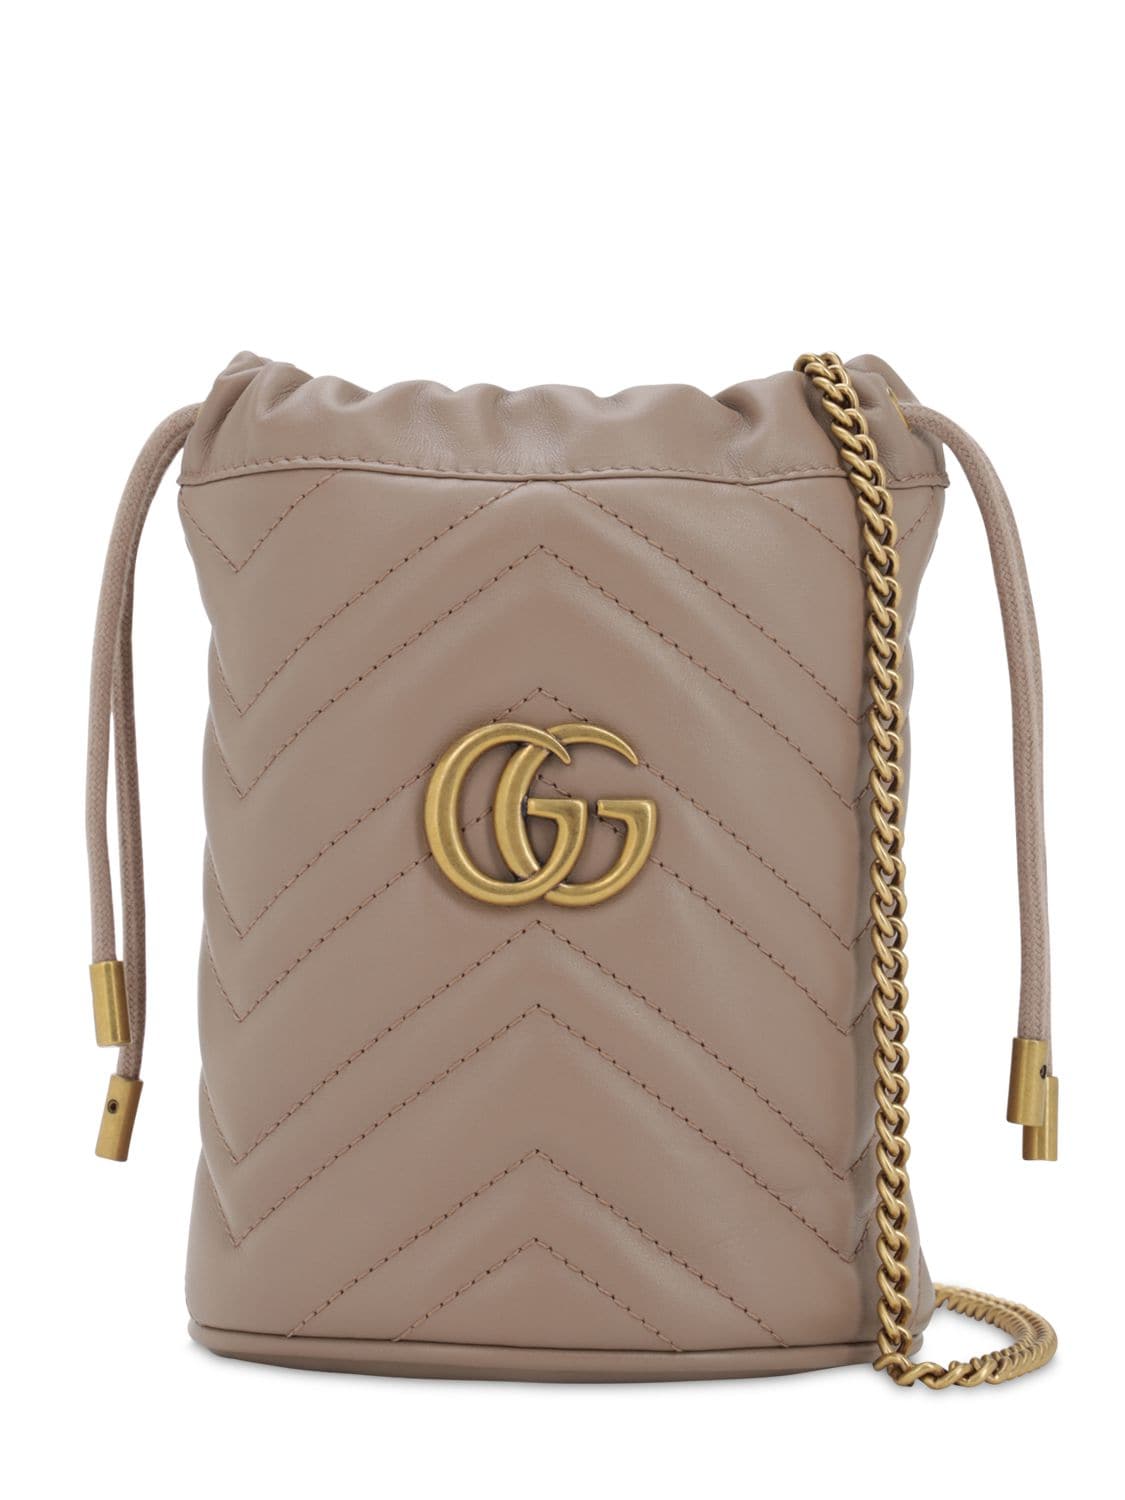 Gucci Mini Gg Marmont 2.0 Leather Bucket Bag In 5729 Porcel | ModeSens